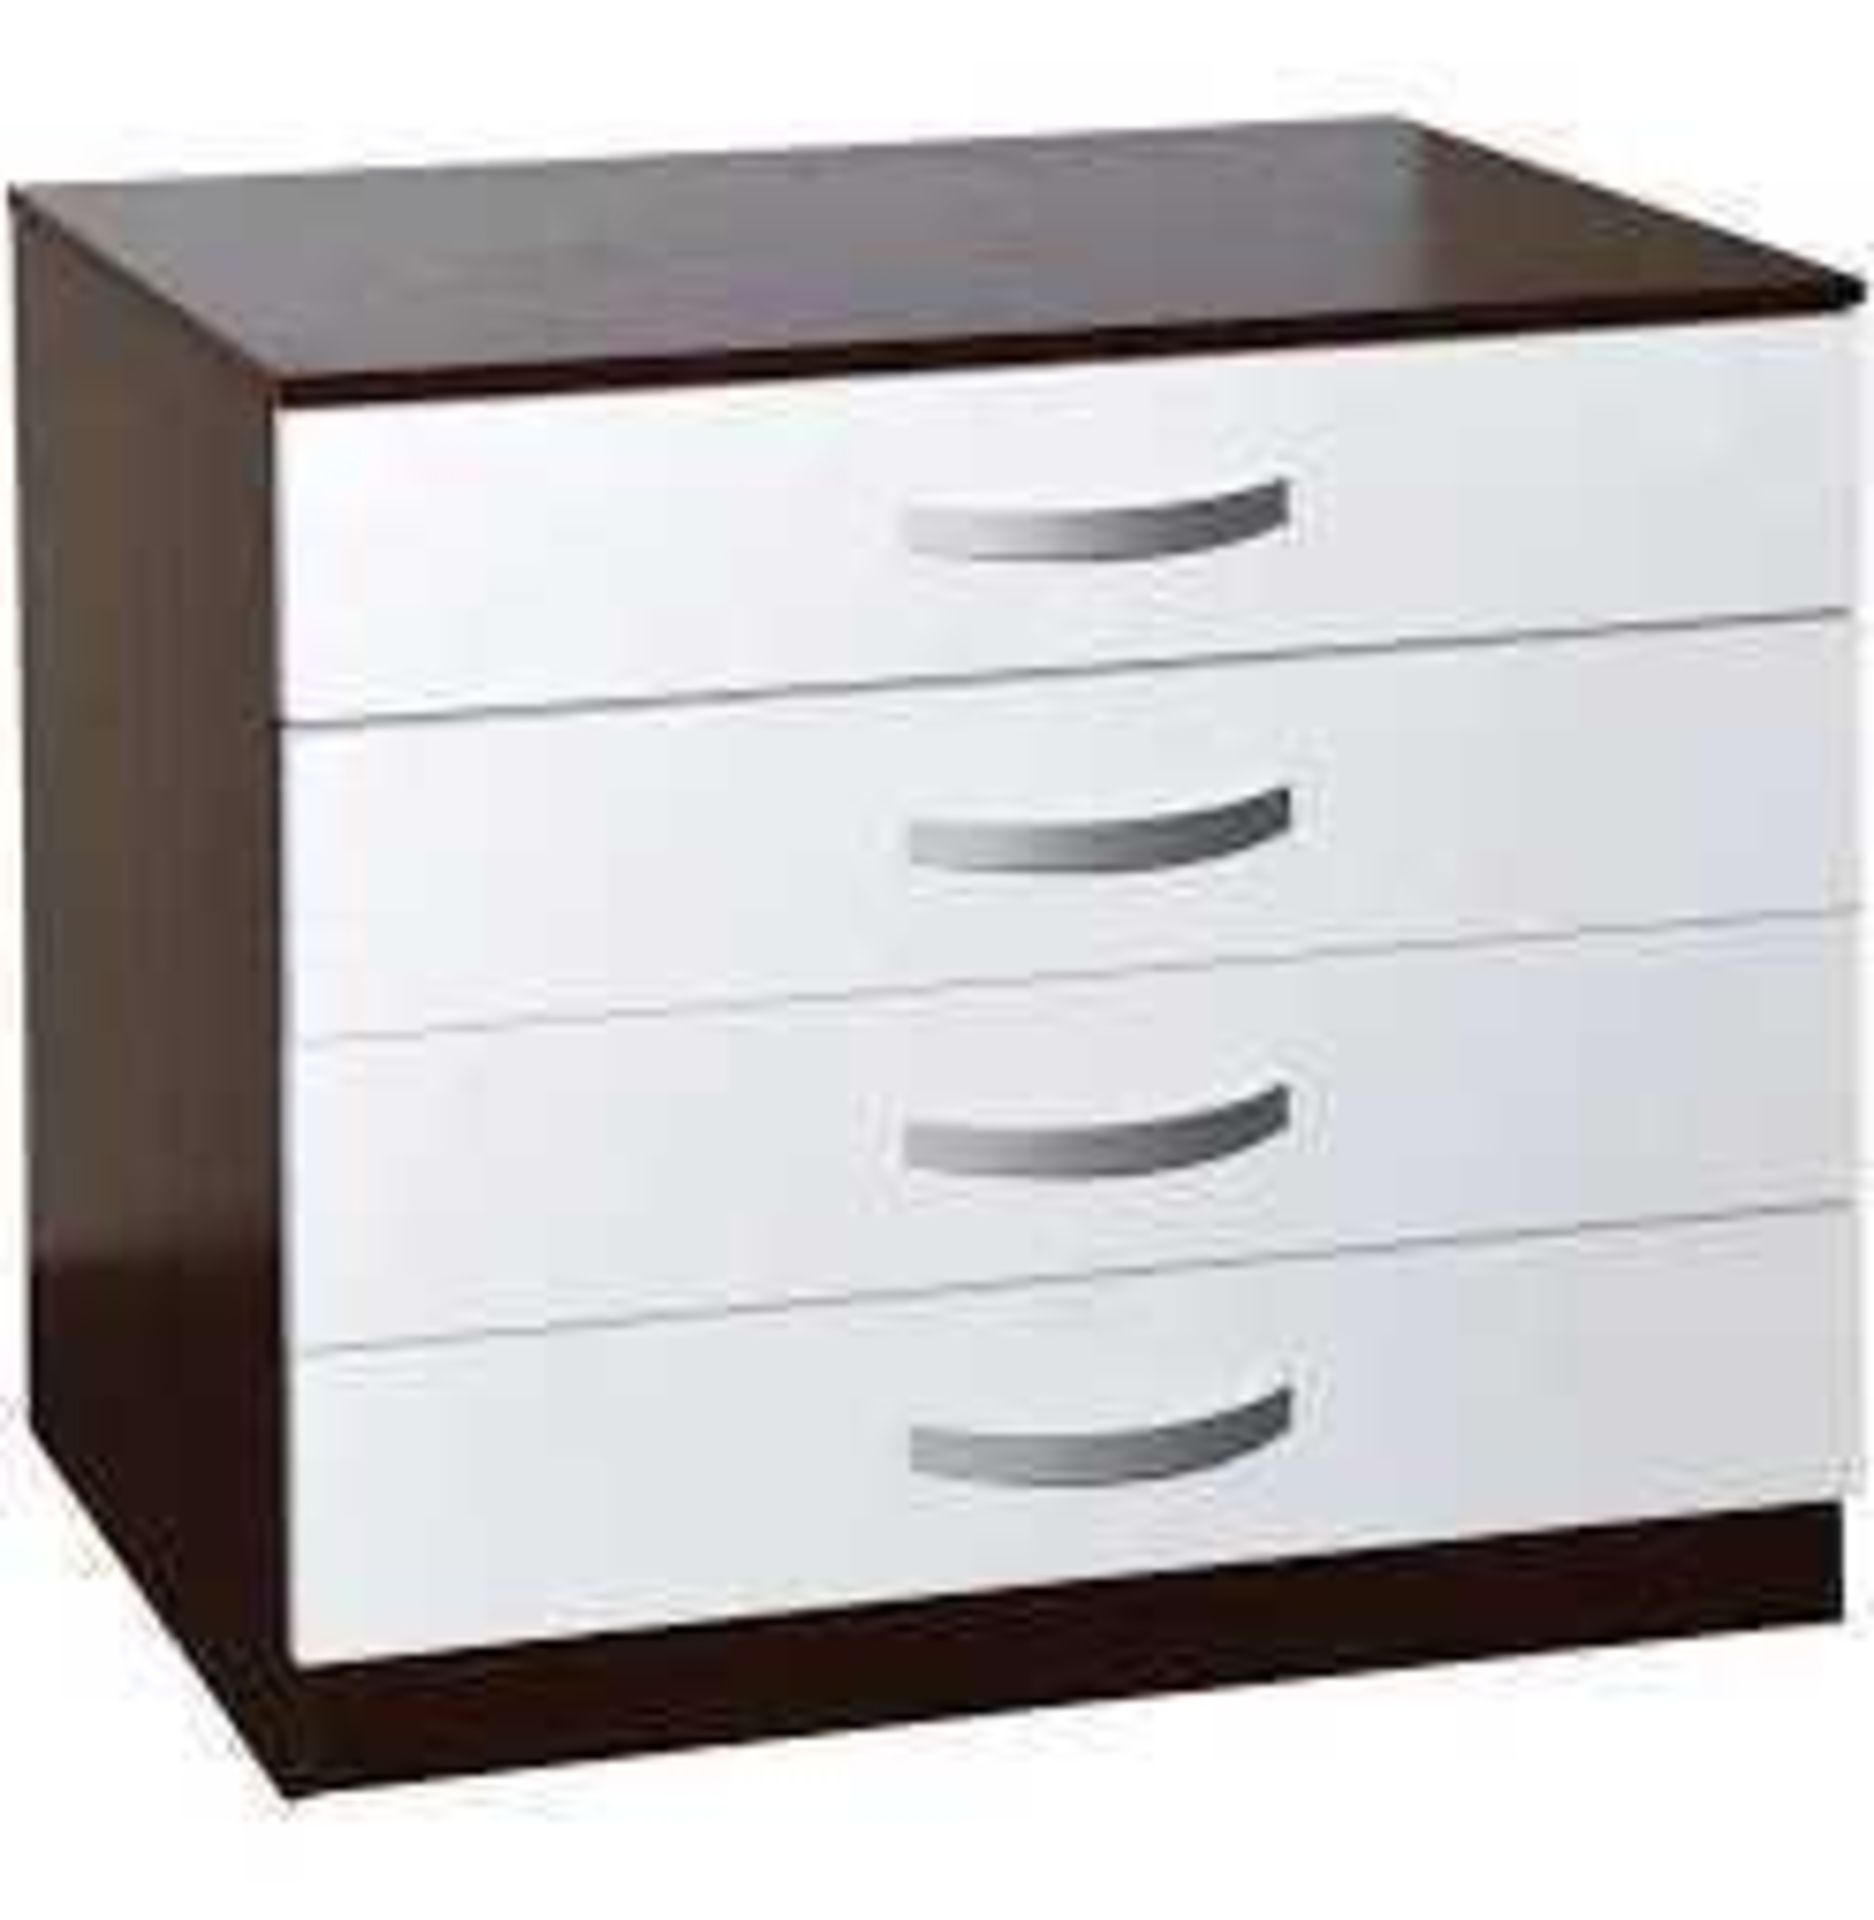 RRP £110 Boxed Vida Designs Hulio Chest Of 4 Drawers